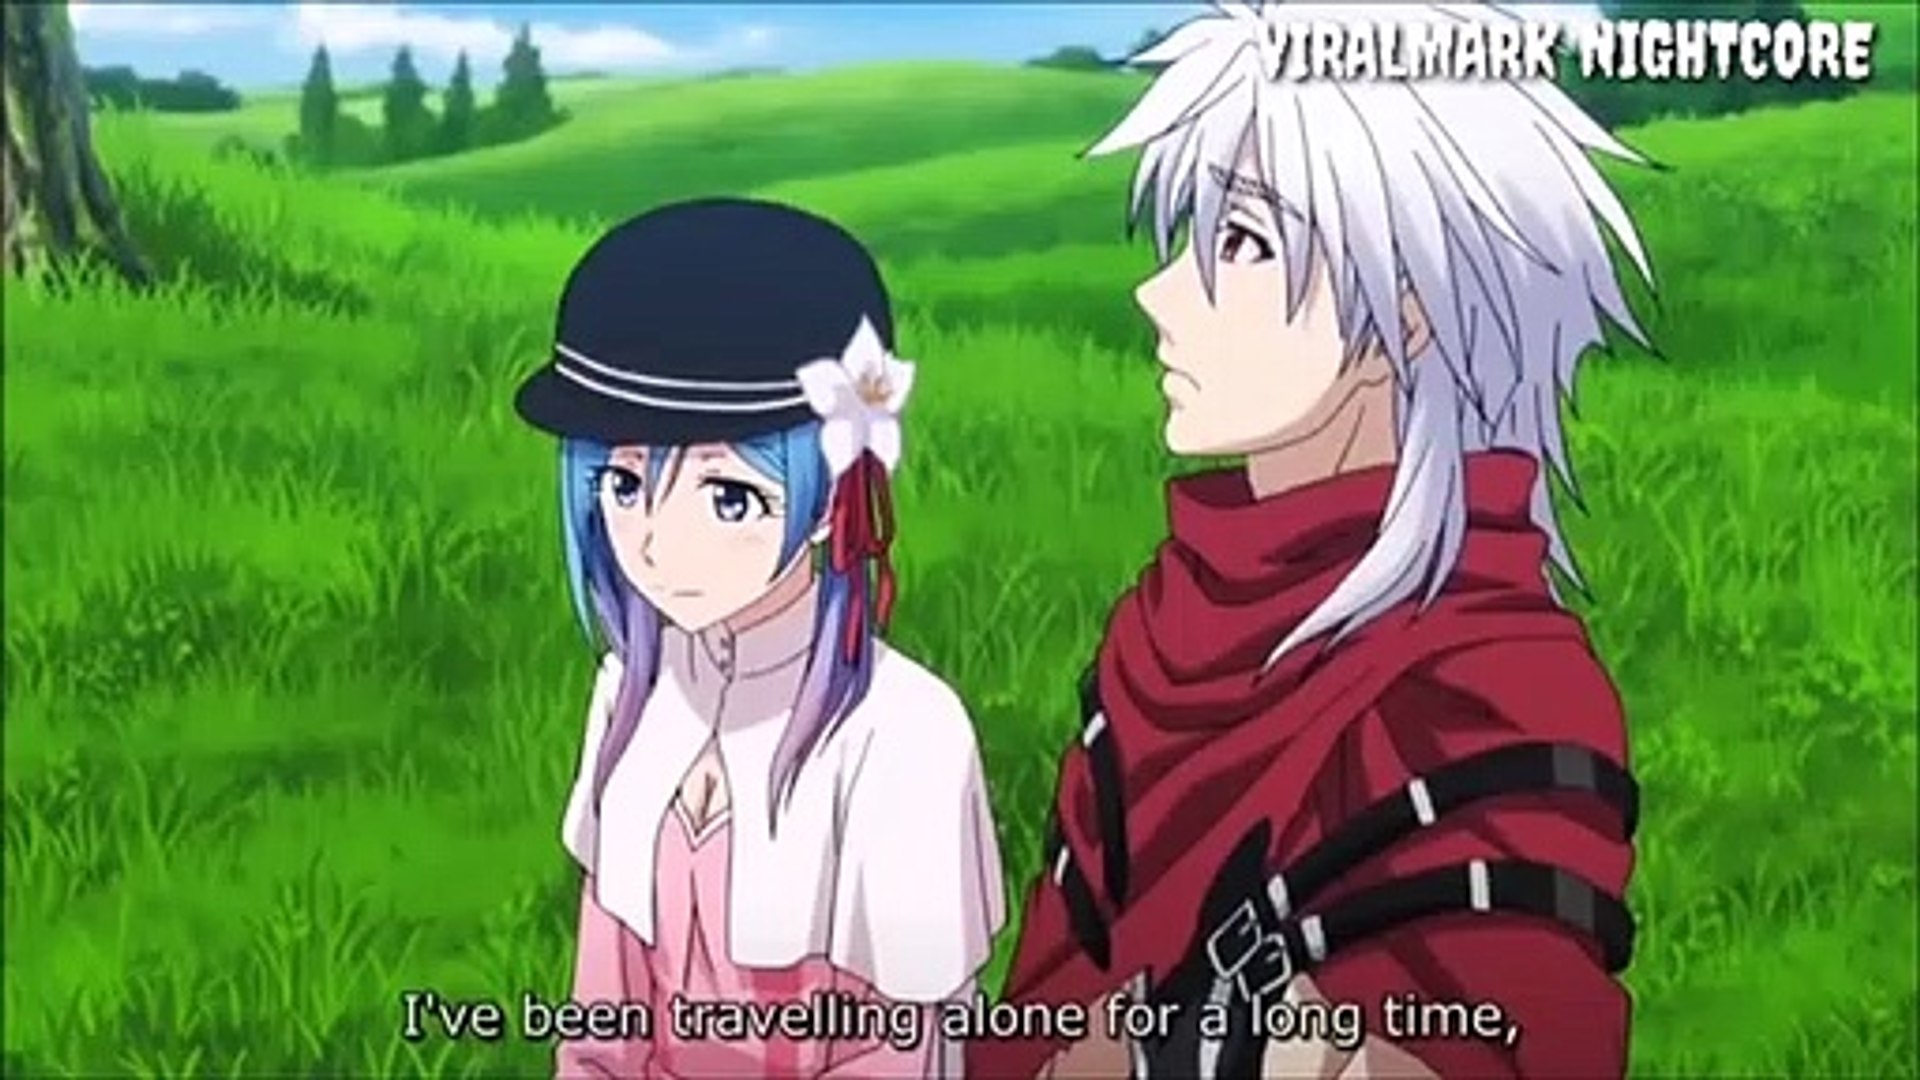 i wouldnt mind- plunderer amv - video Dailymotion